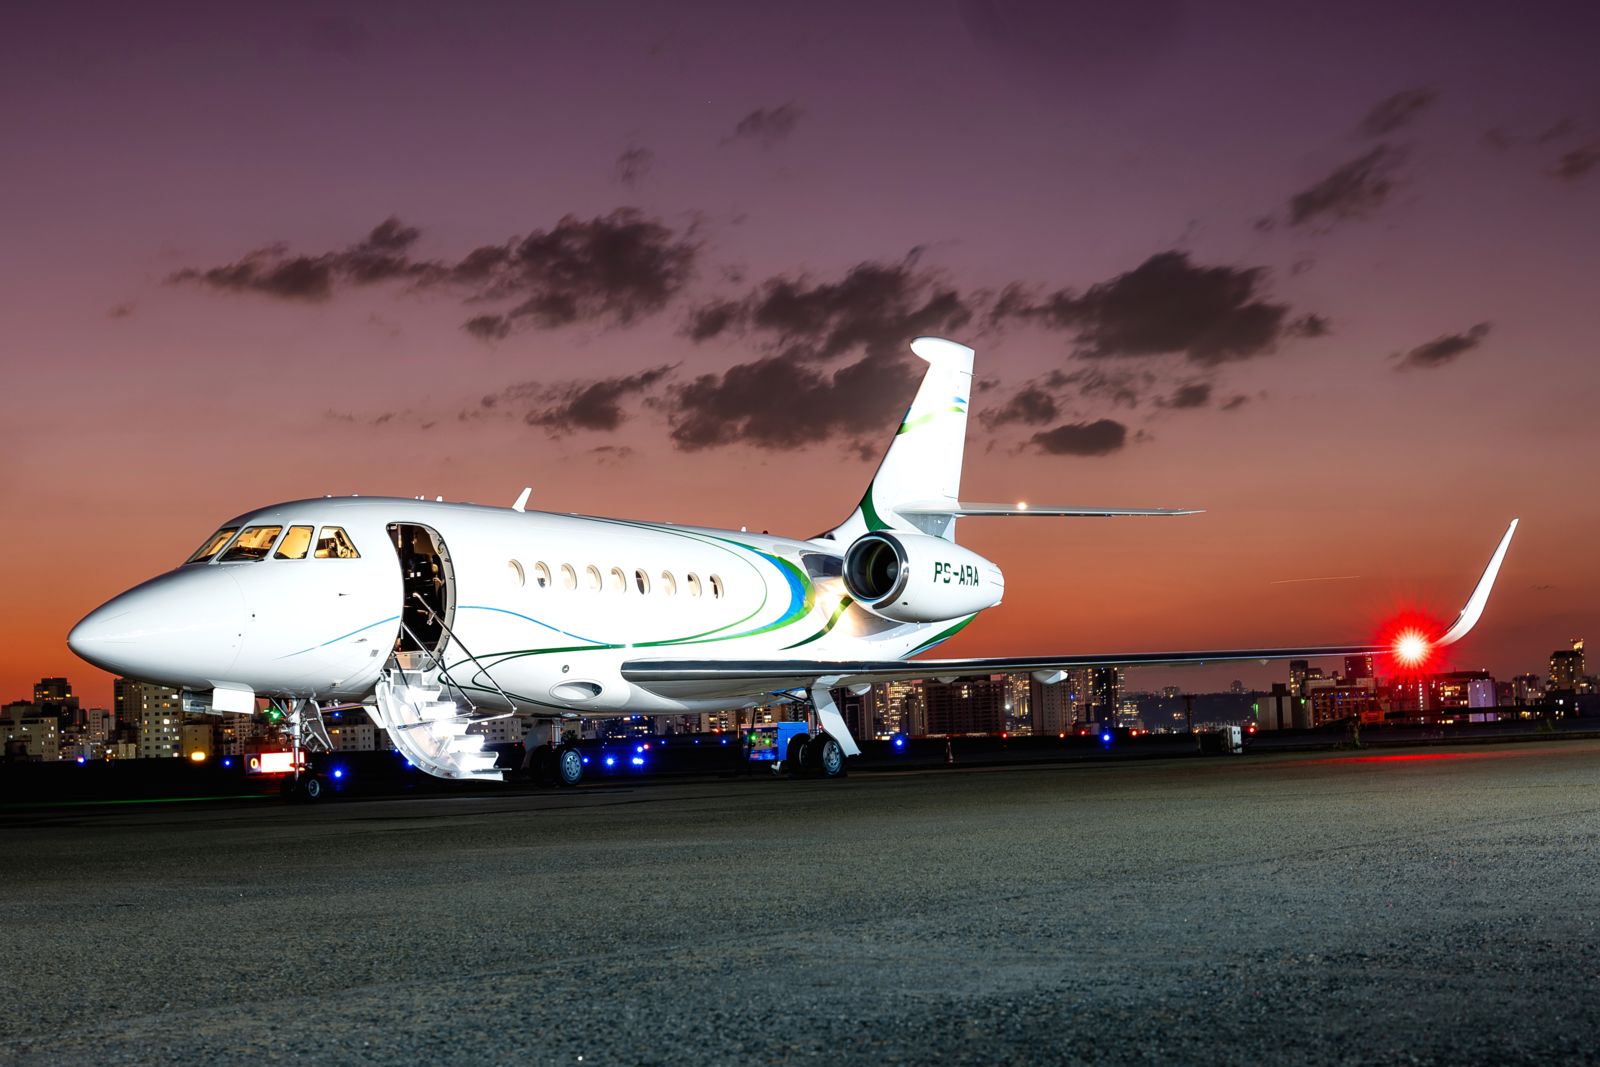 Dassault Falcon 2000LXS  S/N 370 for sale | gallery image: /userfiles/images/falcon%202000_ps-ara_exterior_ago23-31.jpg